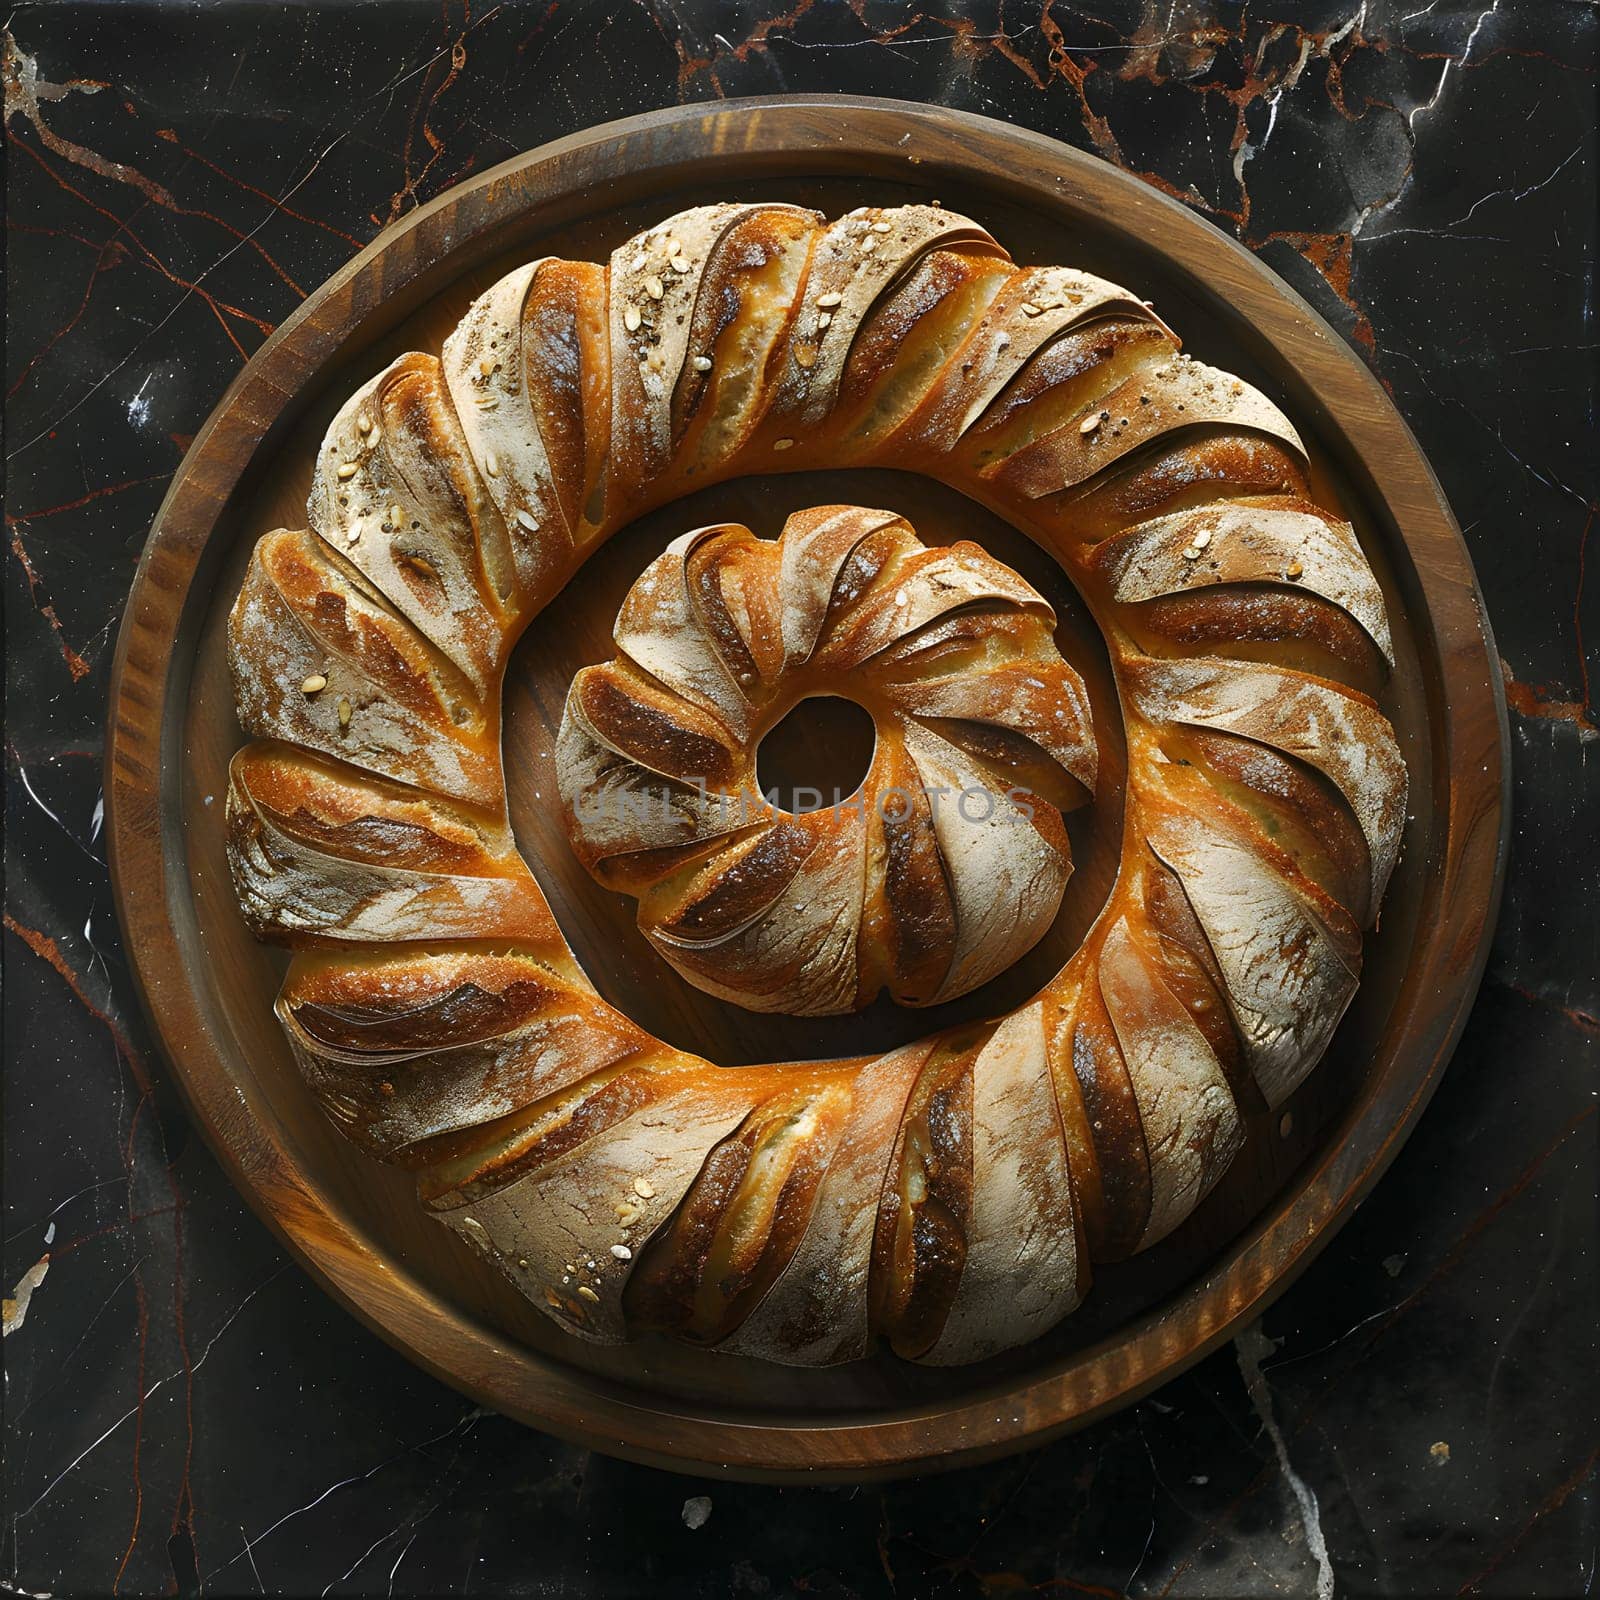 A spiralshaped loaf of brown bread in a wooden bowl on a table, a delicious baked goods made with terrestrial animal ingredients. Perfect for any cuisine or dish recipe